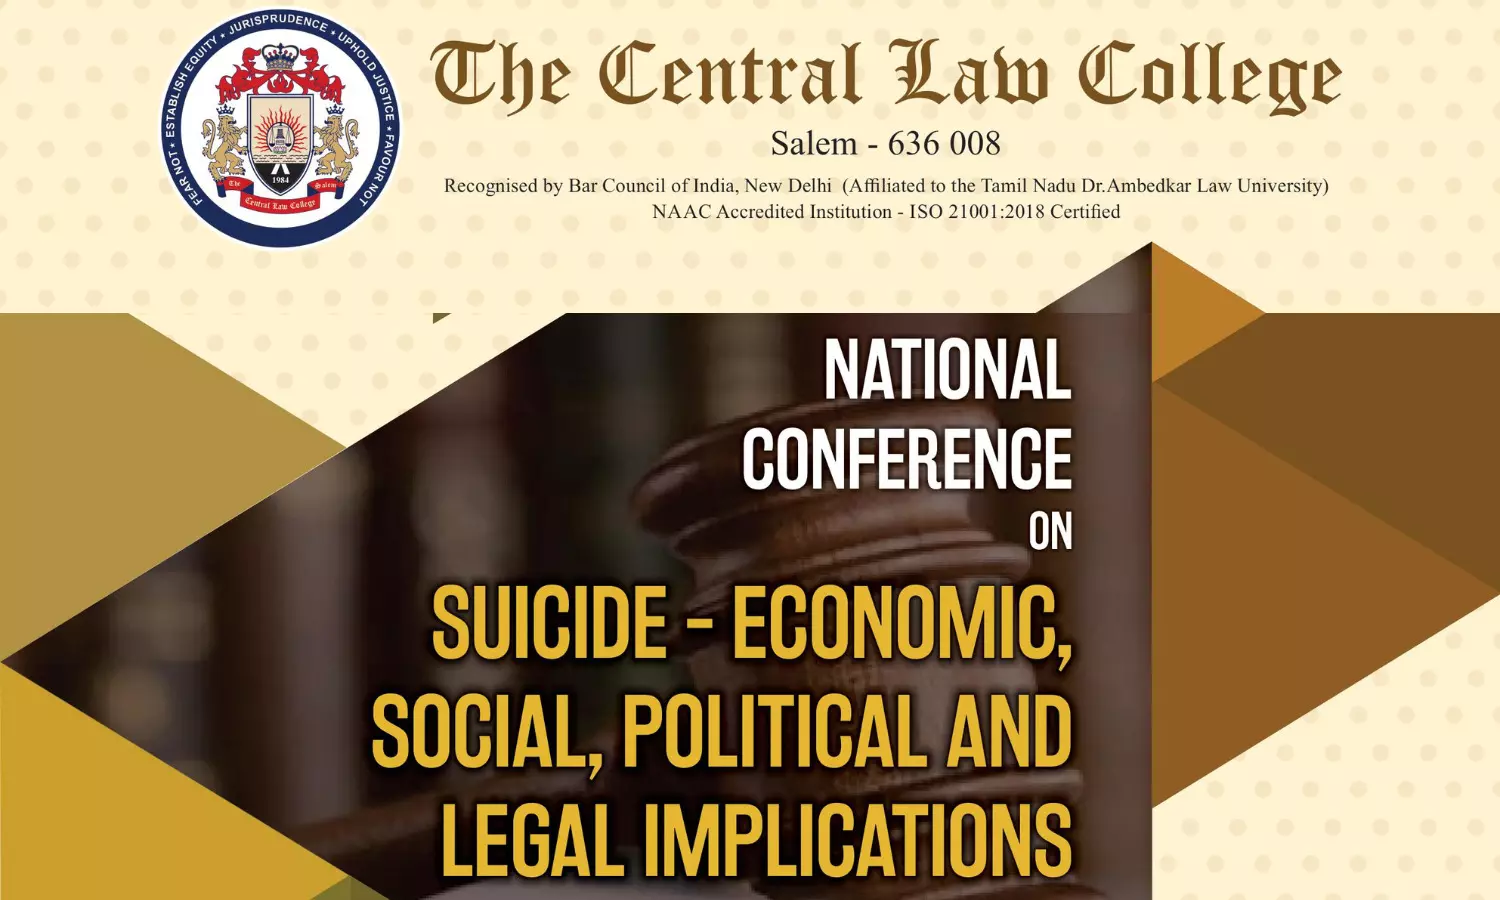 One Day National Conference on Suicide - Economic, Social, Political & Legal Implications 2023 | 25 Feb 2023 | The Central Law College, Salem